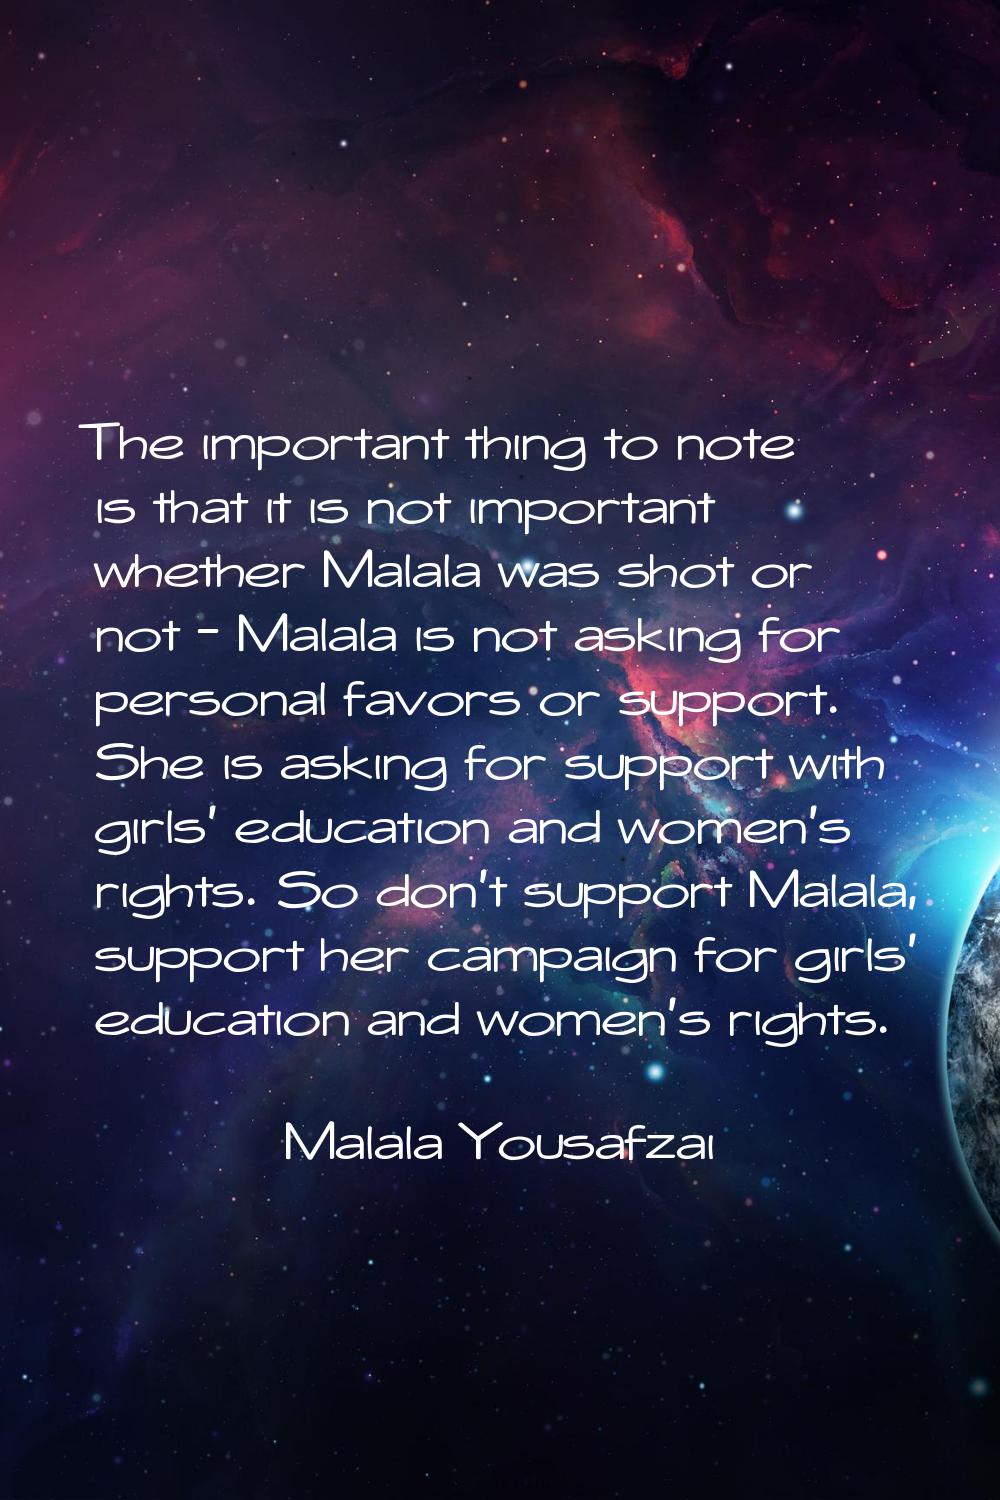 The important thing to note is that it is not important whether Malala was shot or not - Malala is 